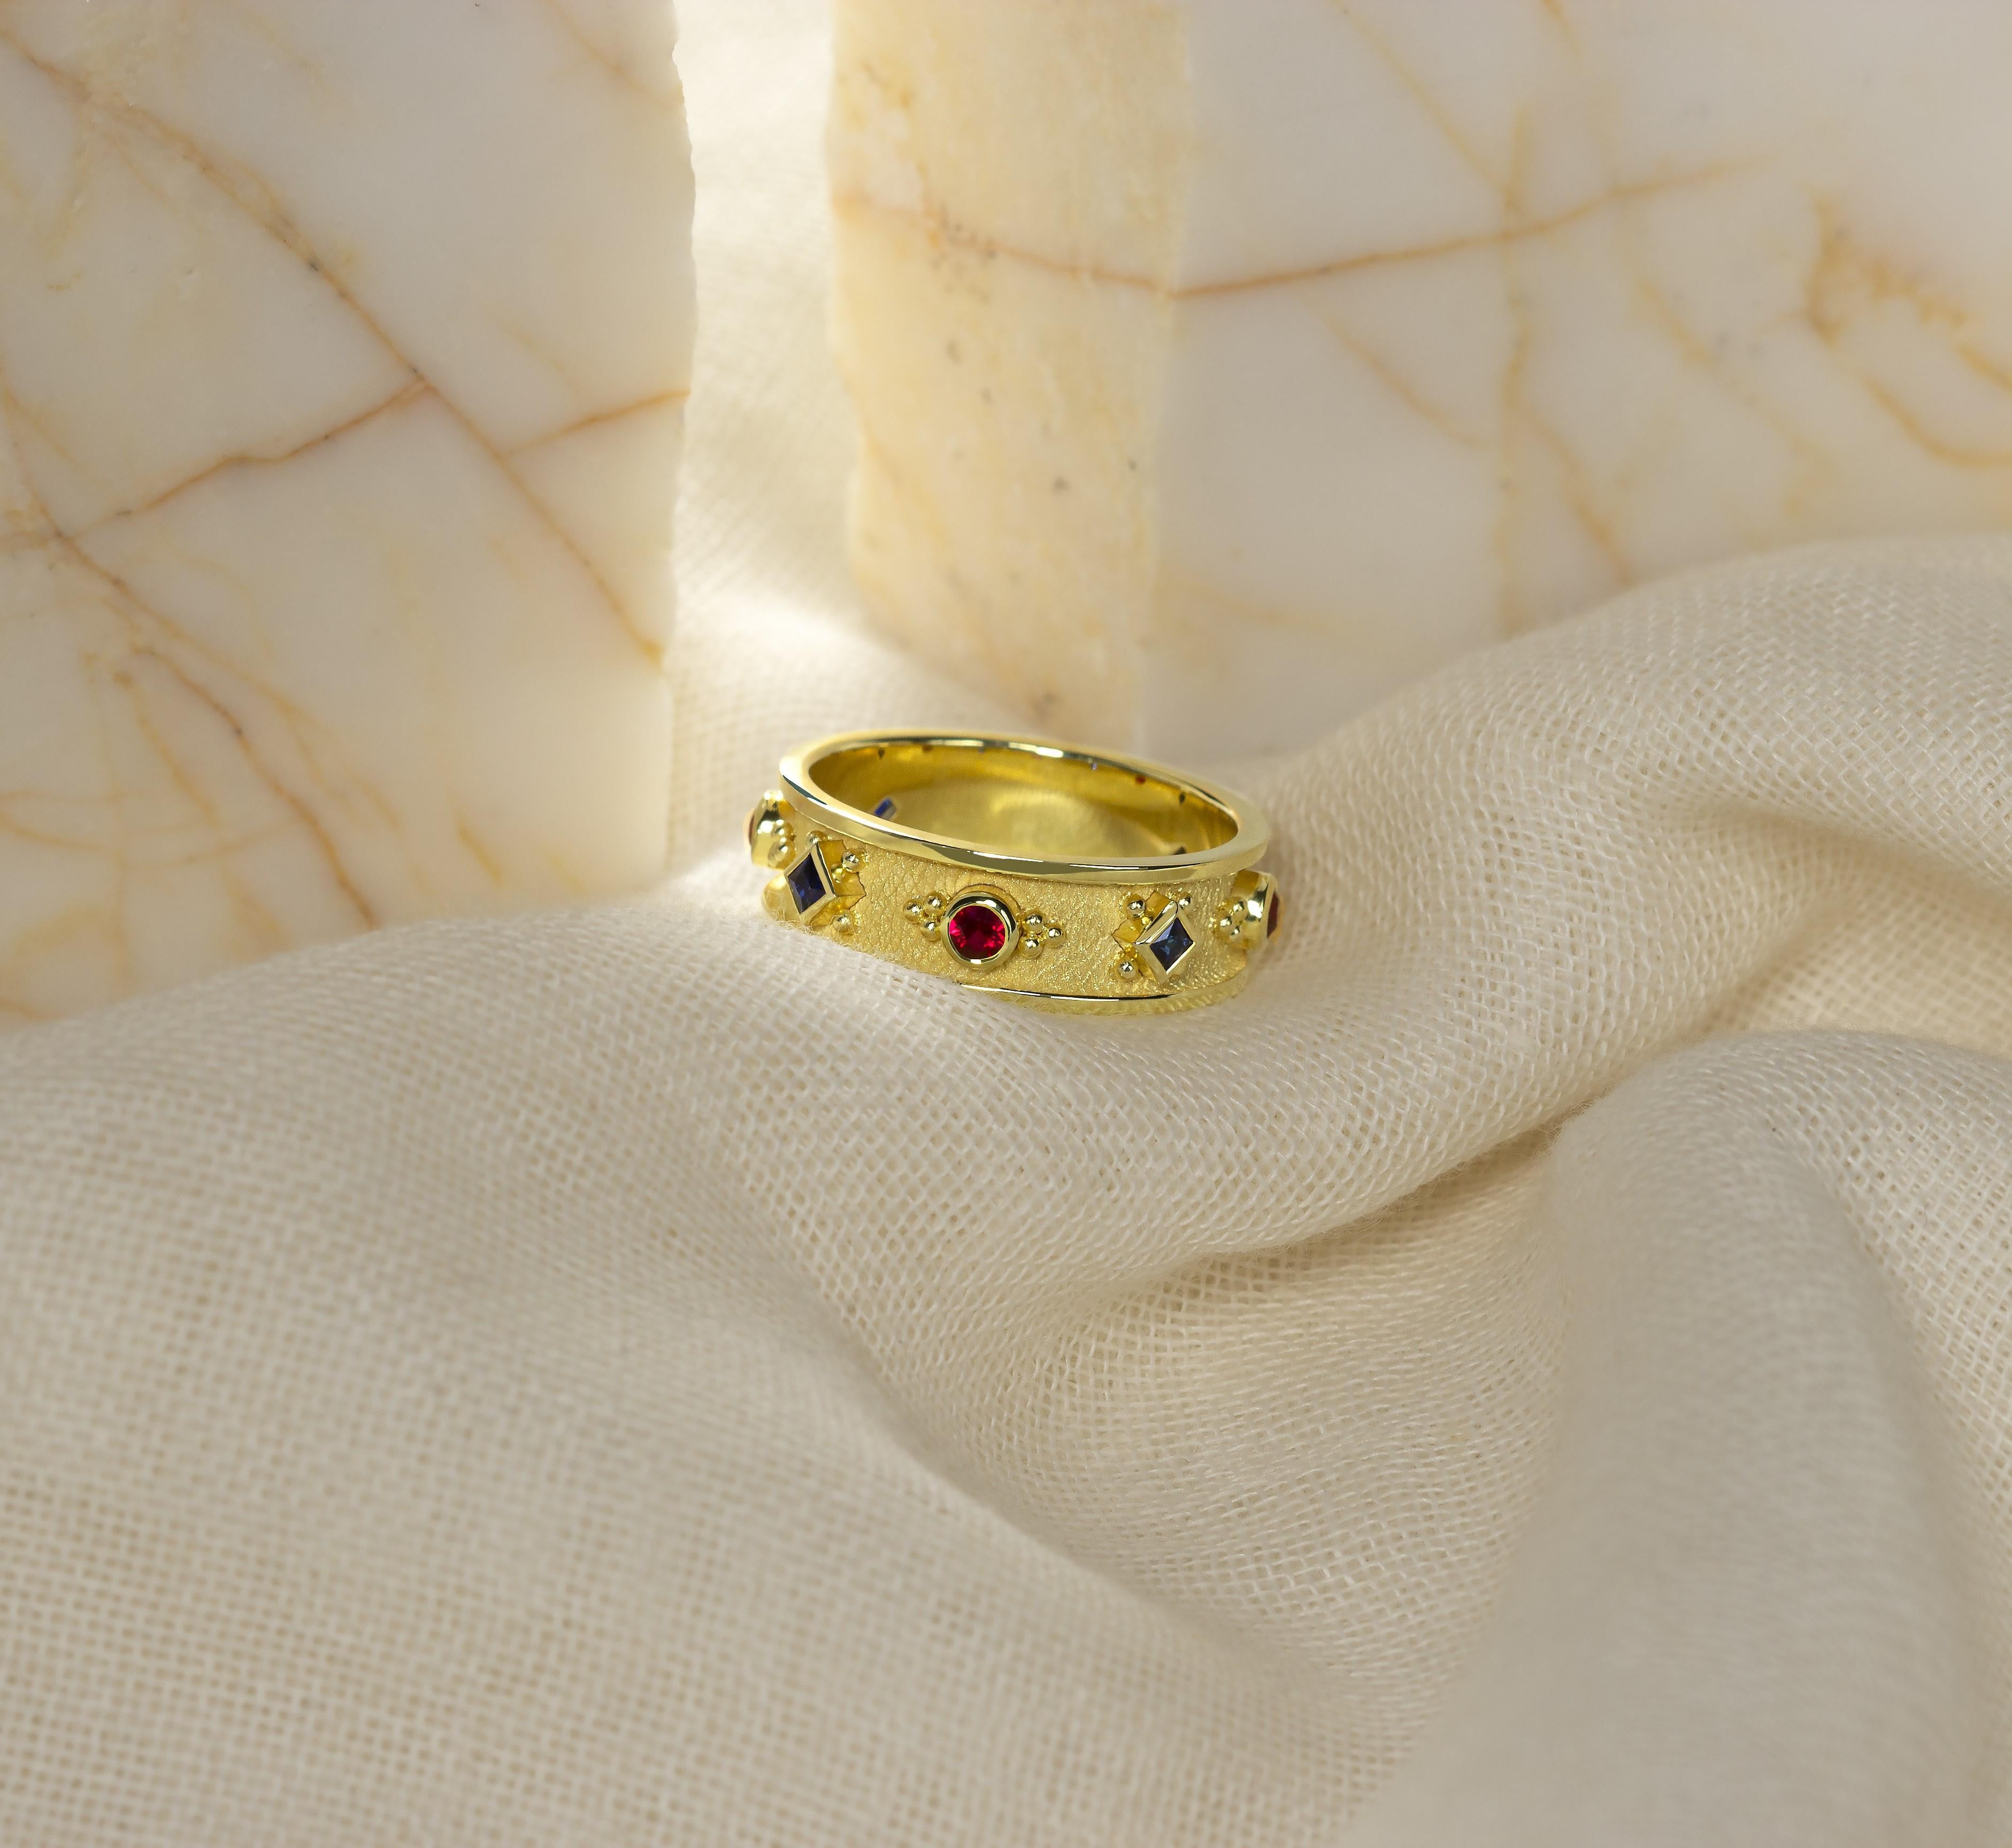 Adorn your finger with exquisite elegance in this gold ring featuring a harmonious blend of radiant rubies and sapphires. This timeless piece captures the essence of sophistication, making it a perfect addition to your collection.

100% handmade in